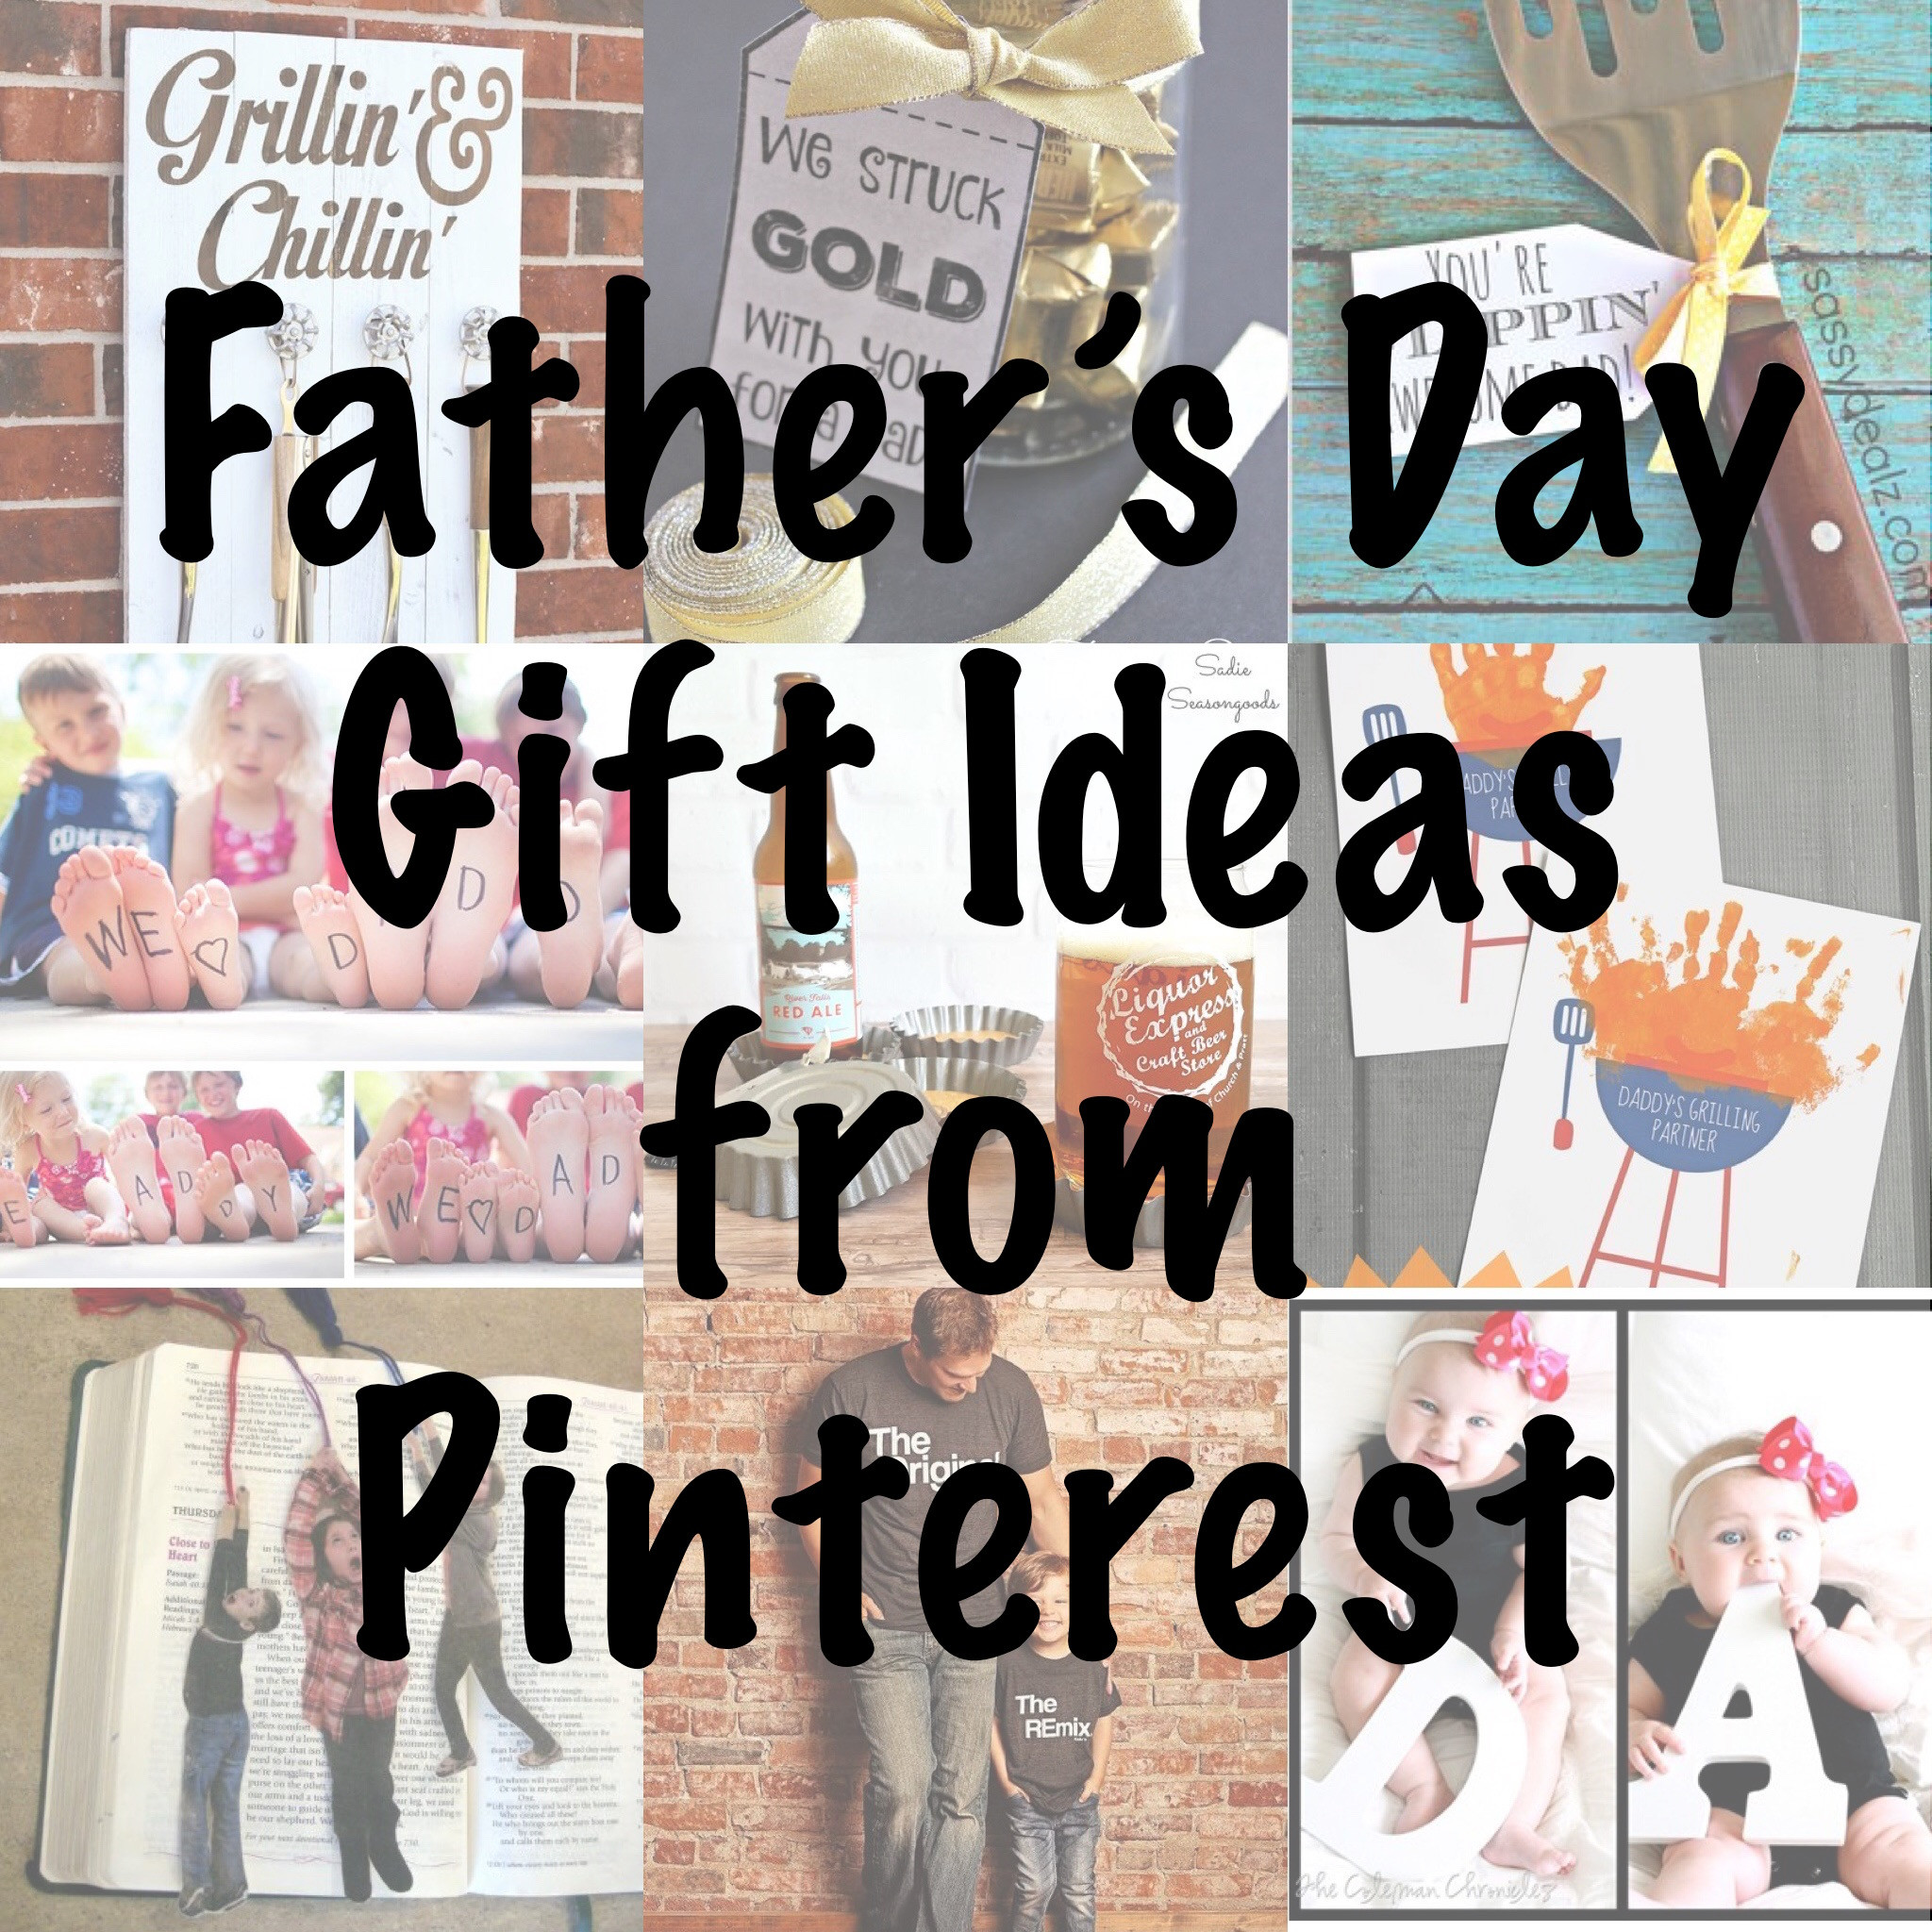 Pinterest Fathers Day Ideas
 8 Great Father s Day Gift Ideas from Pinterest – Welsh